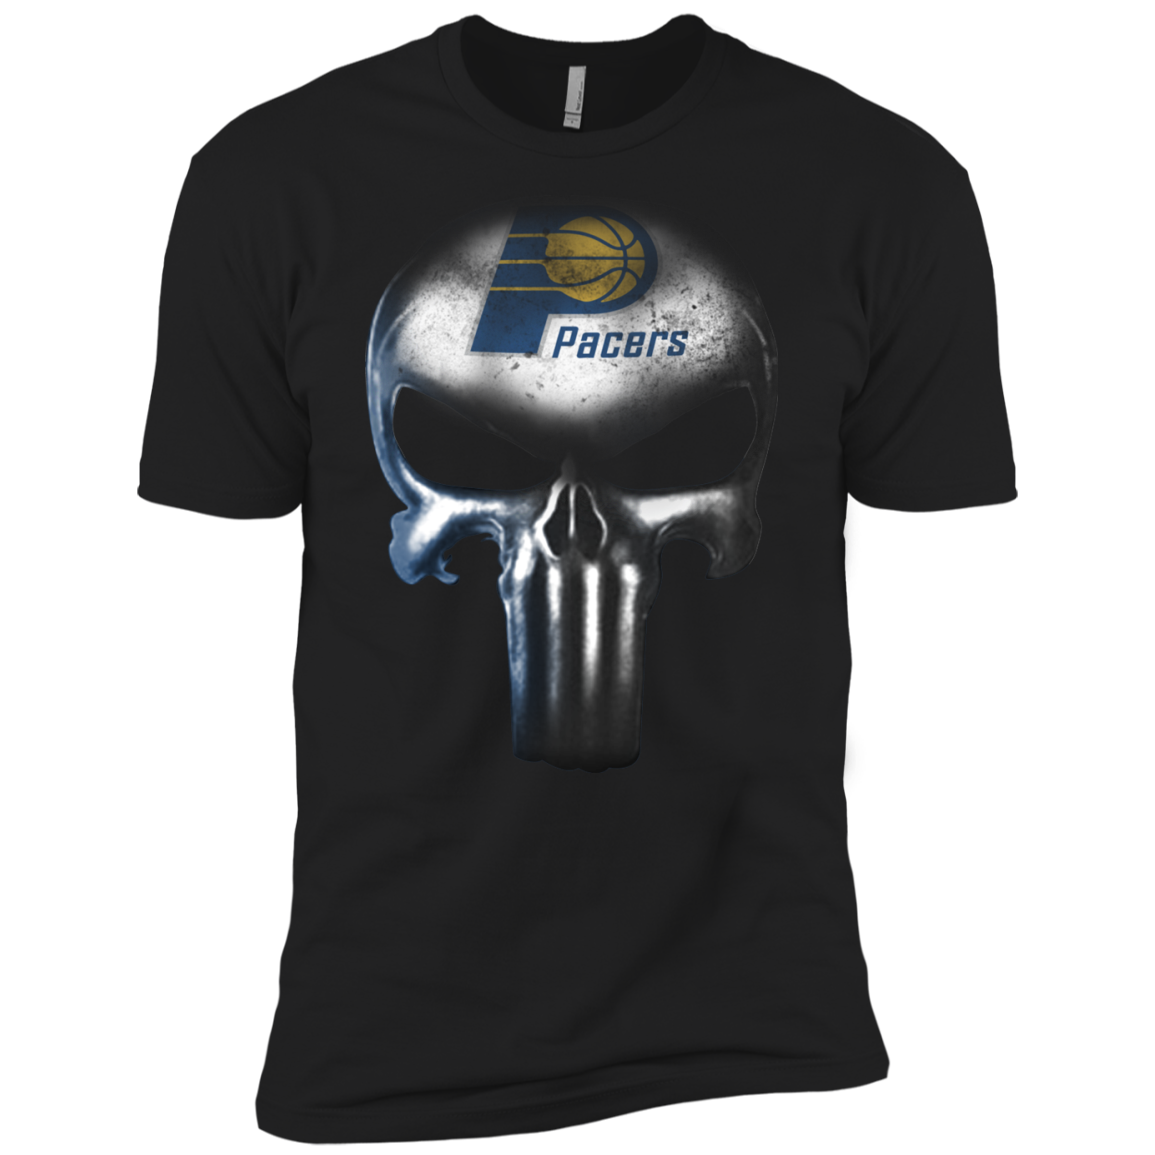 Cover Your Body With Amazing The Punisher Skull T Shirts For Indiana-pacers Fans Short Sleeve T-shirt